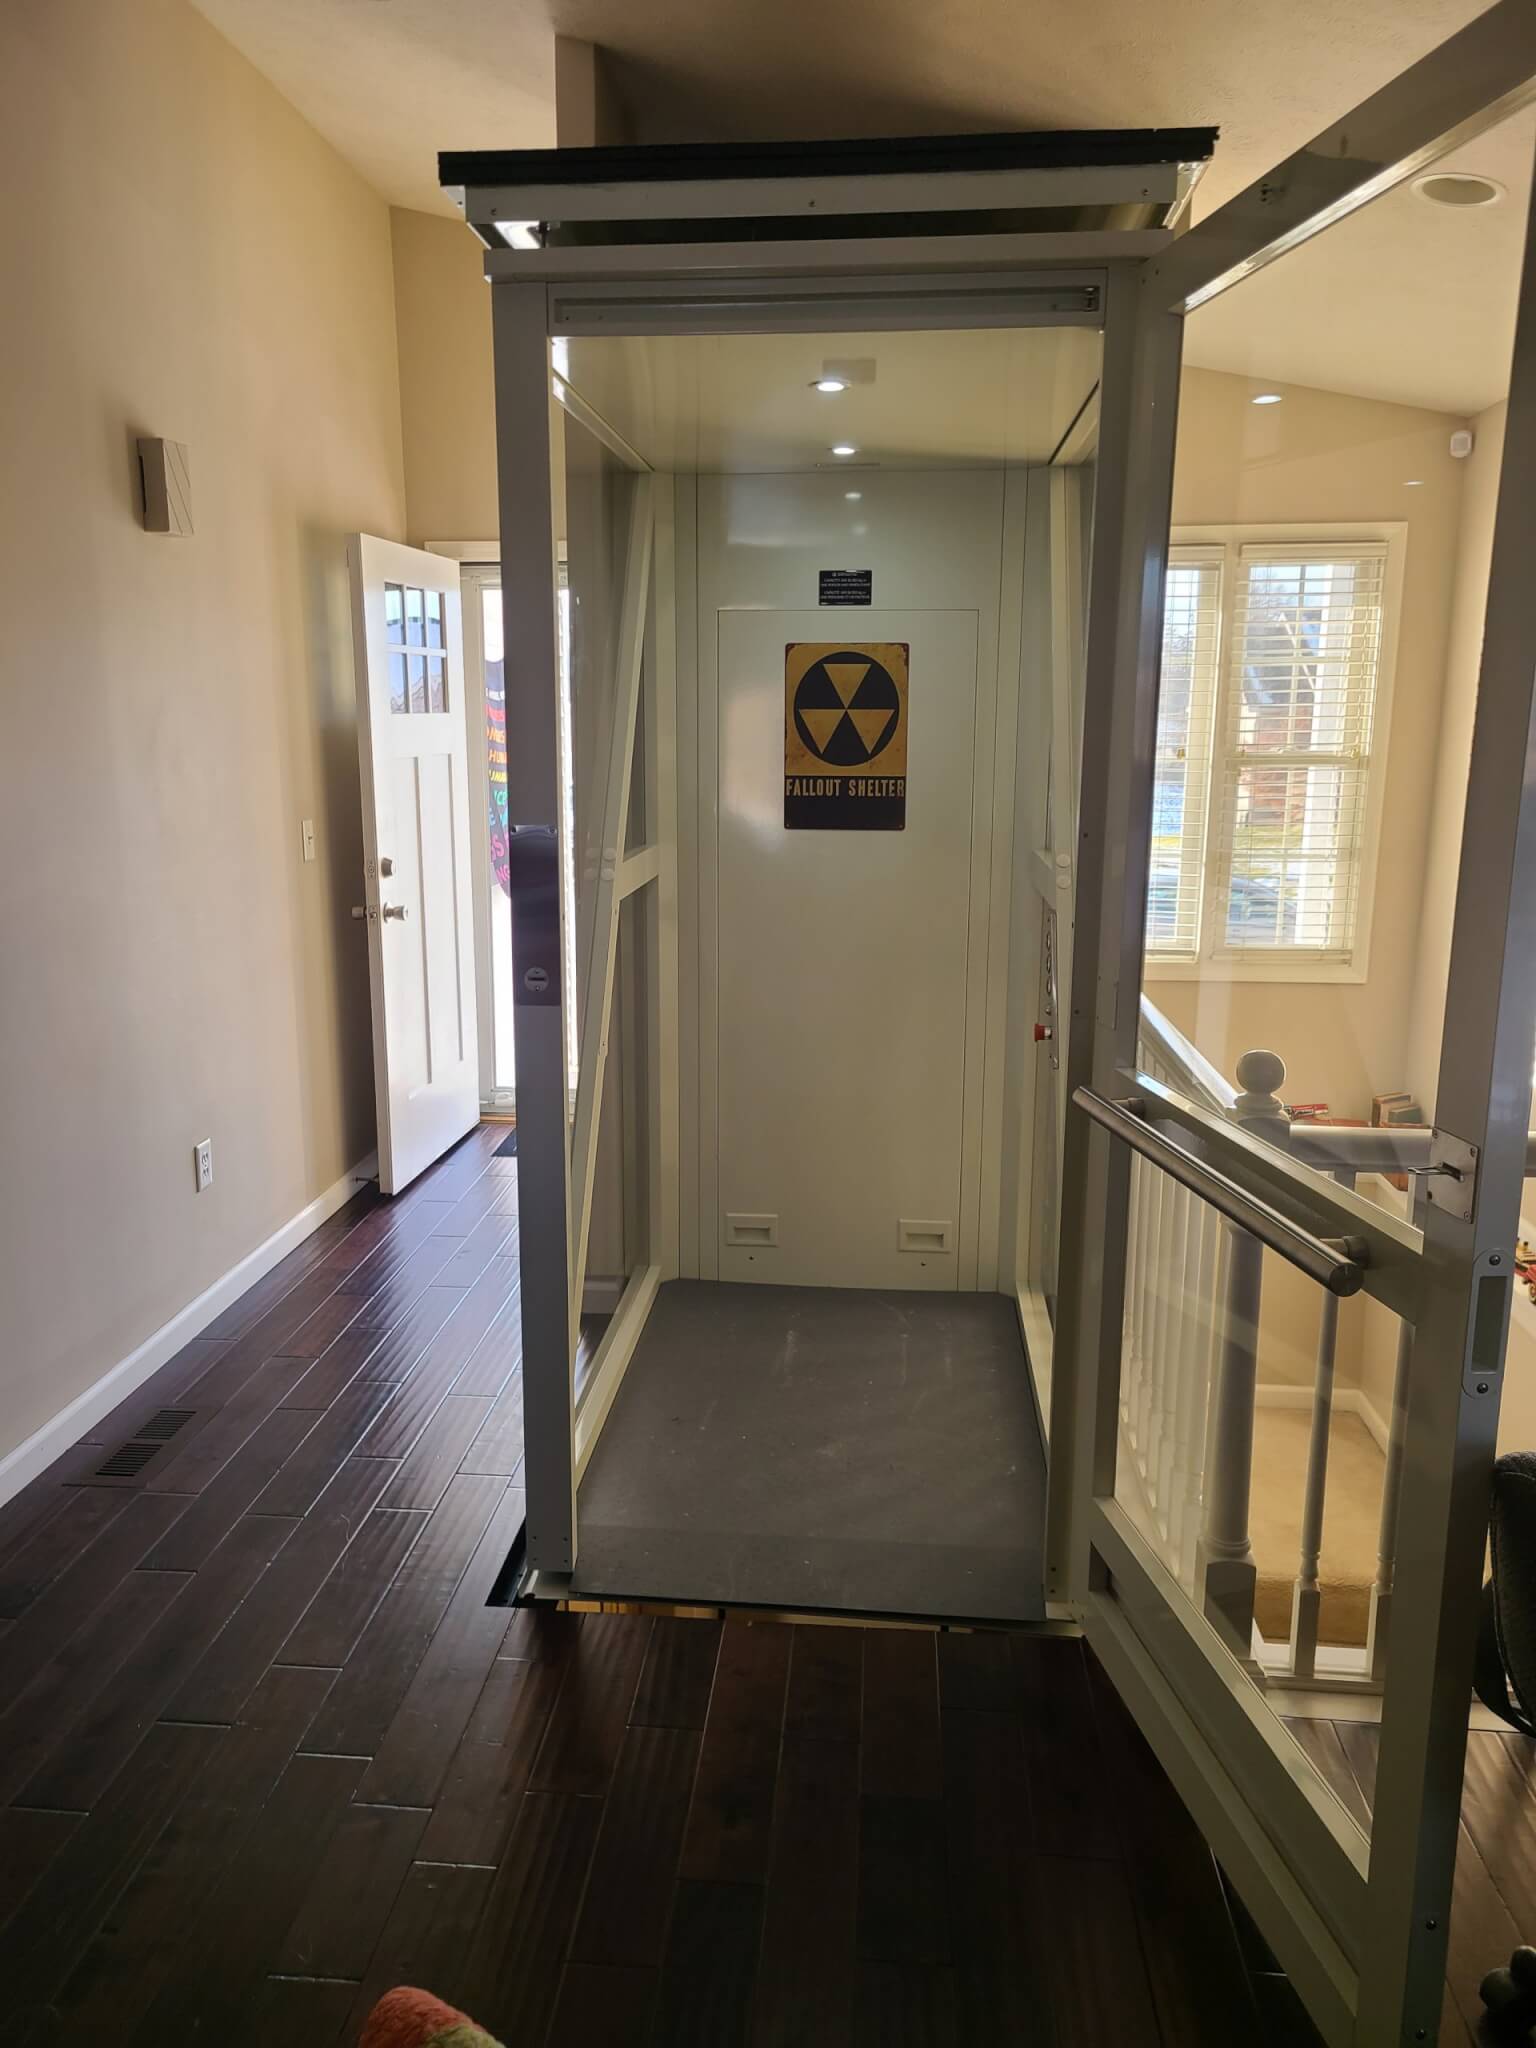 Elevator in new home